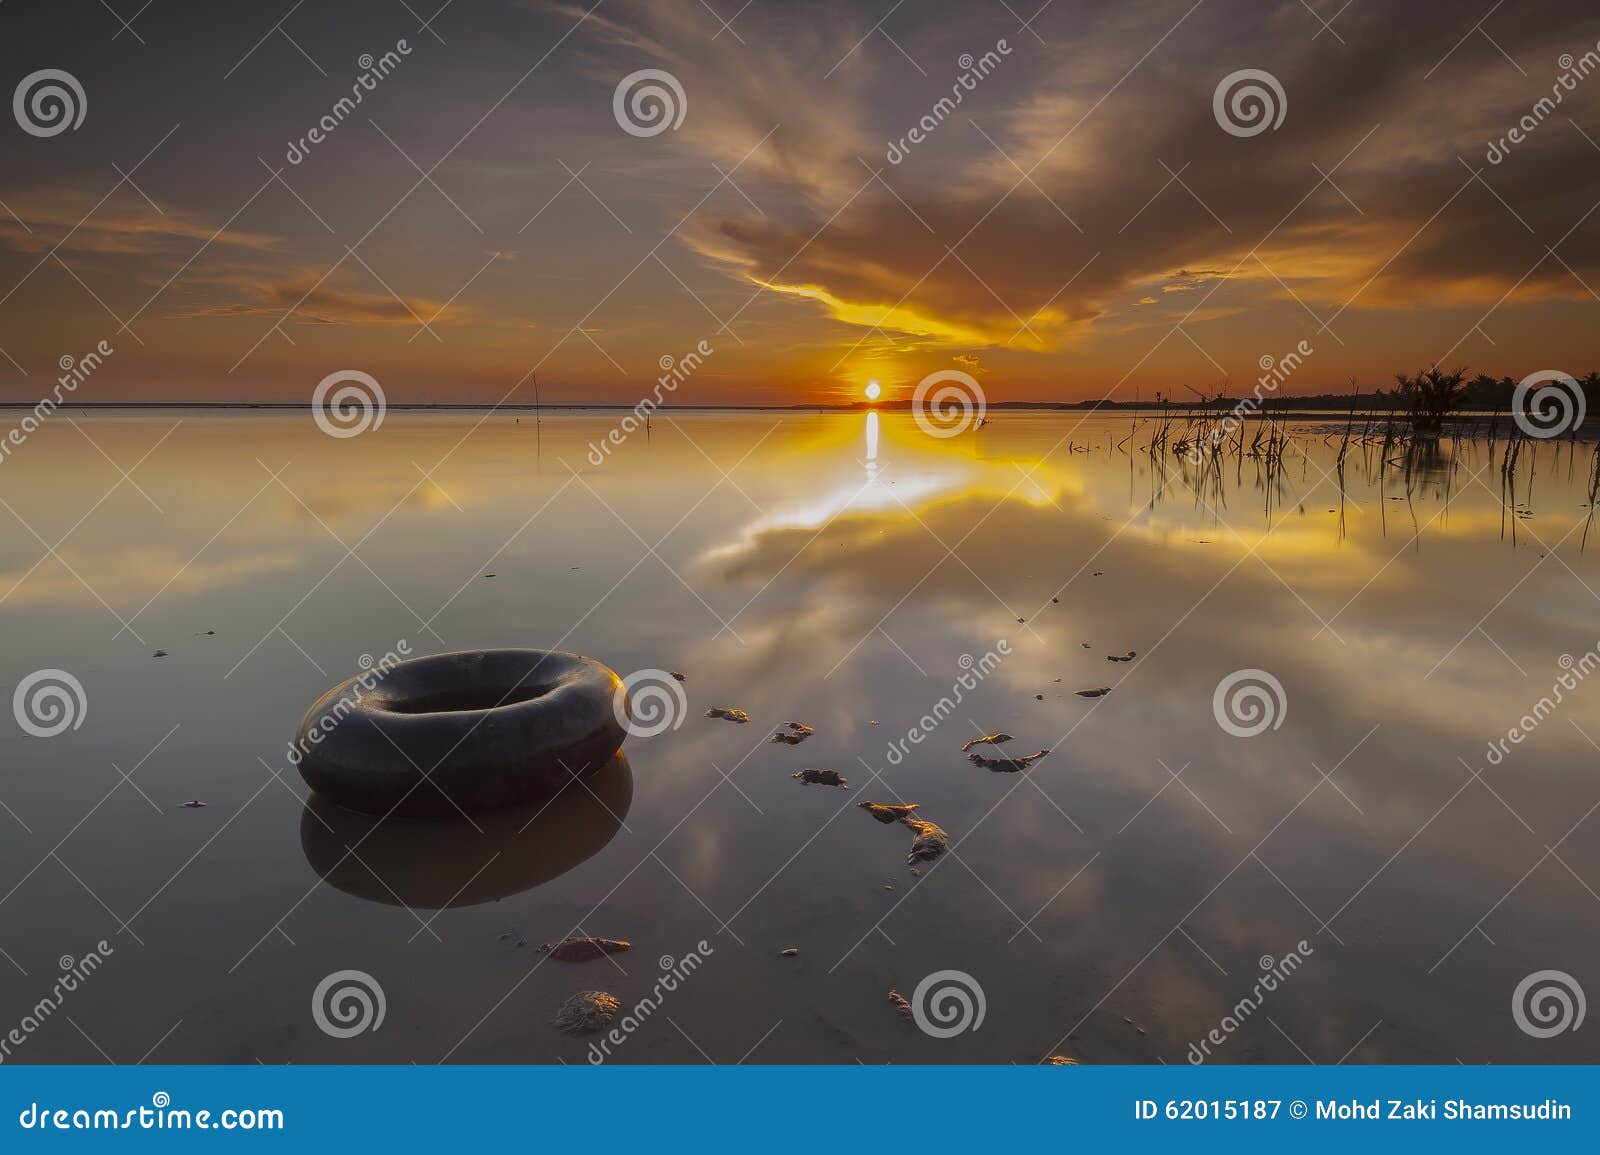 morning float with reflection during summer sunrise at terengganu beach